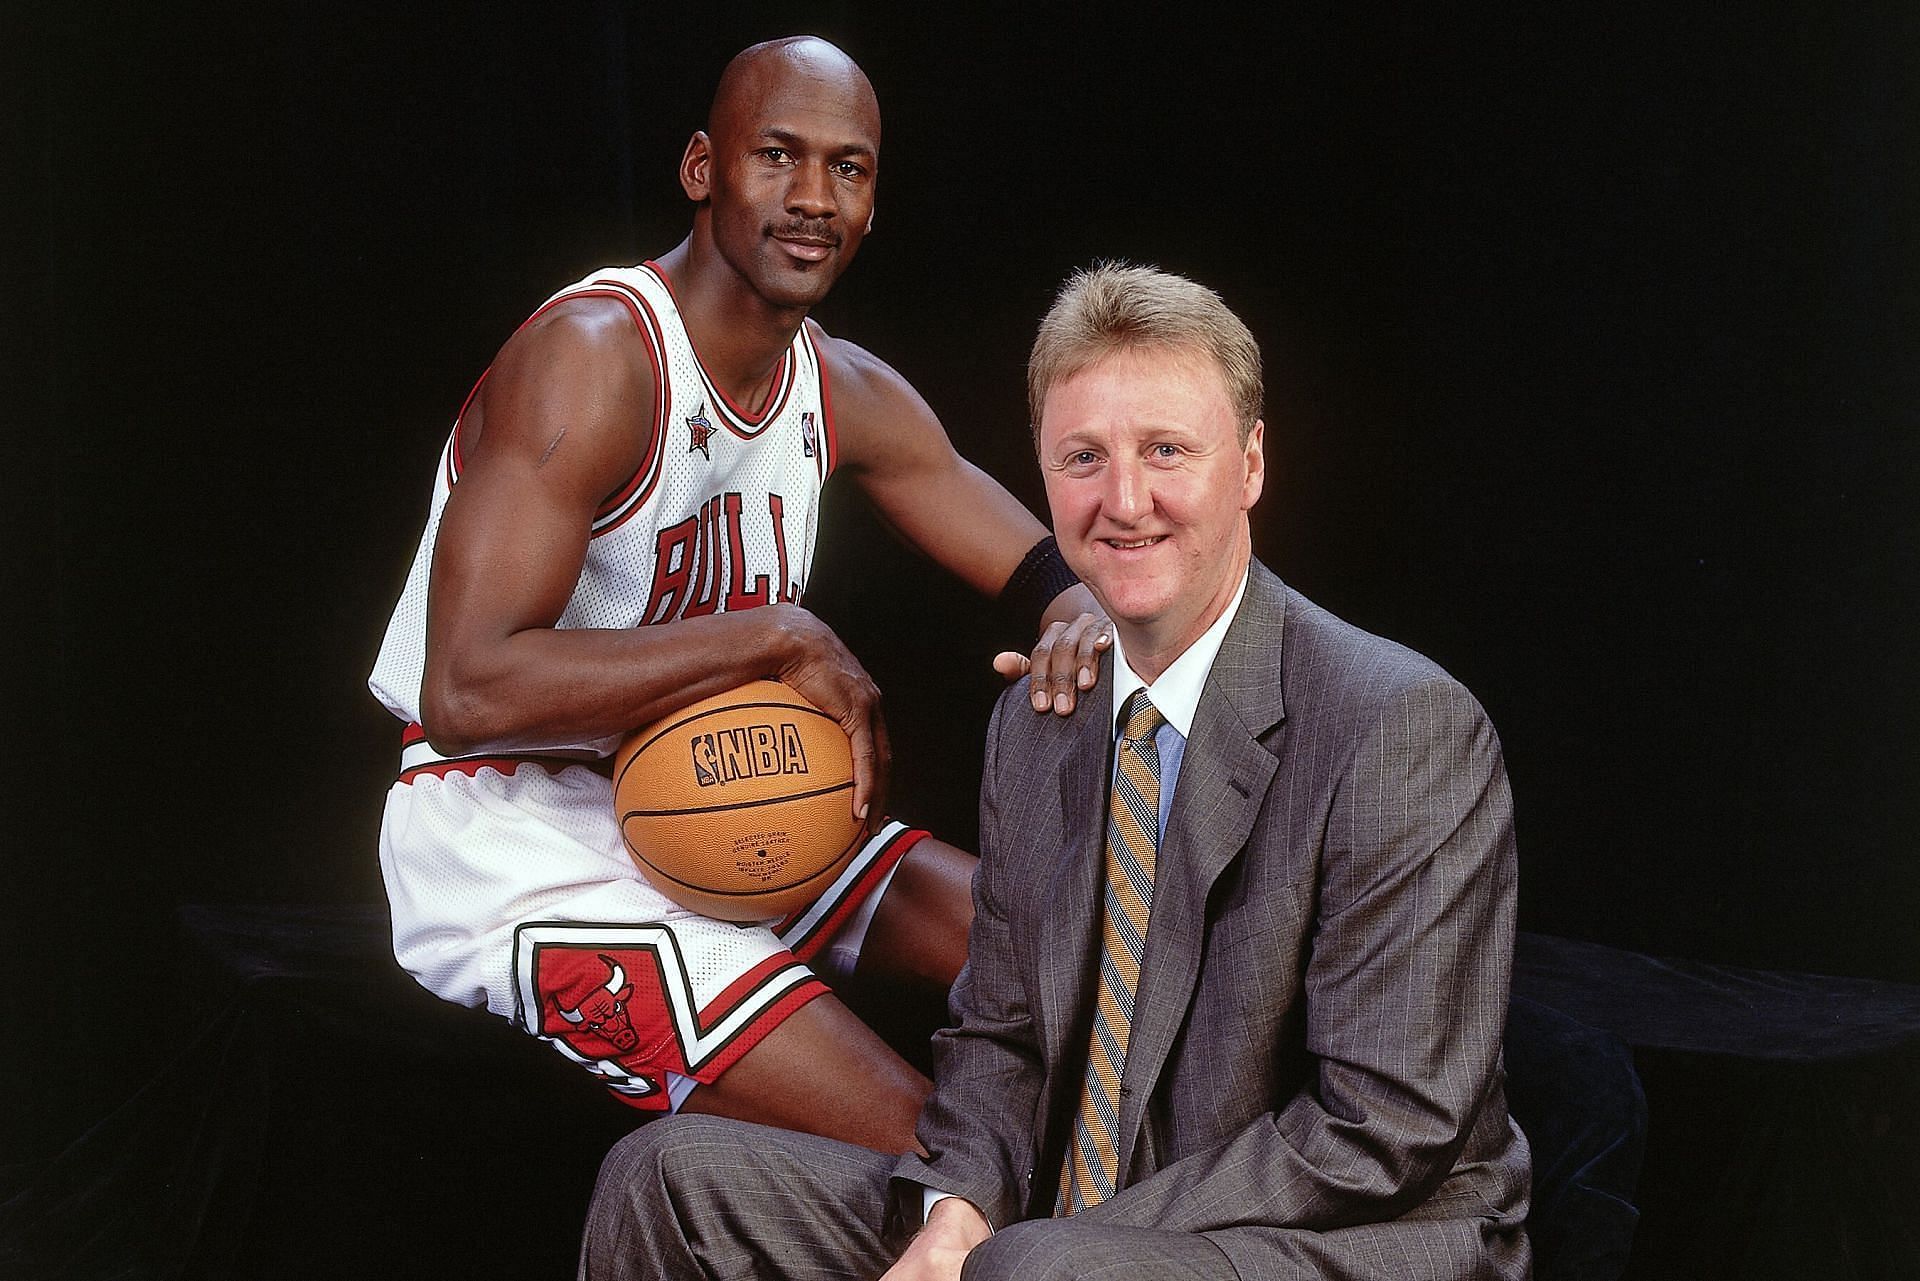 You wouldn't believe what he said': The greatest trash talker ever, Larry  Bird - The Athletic